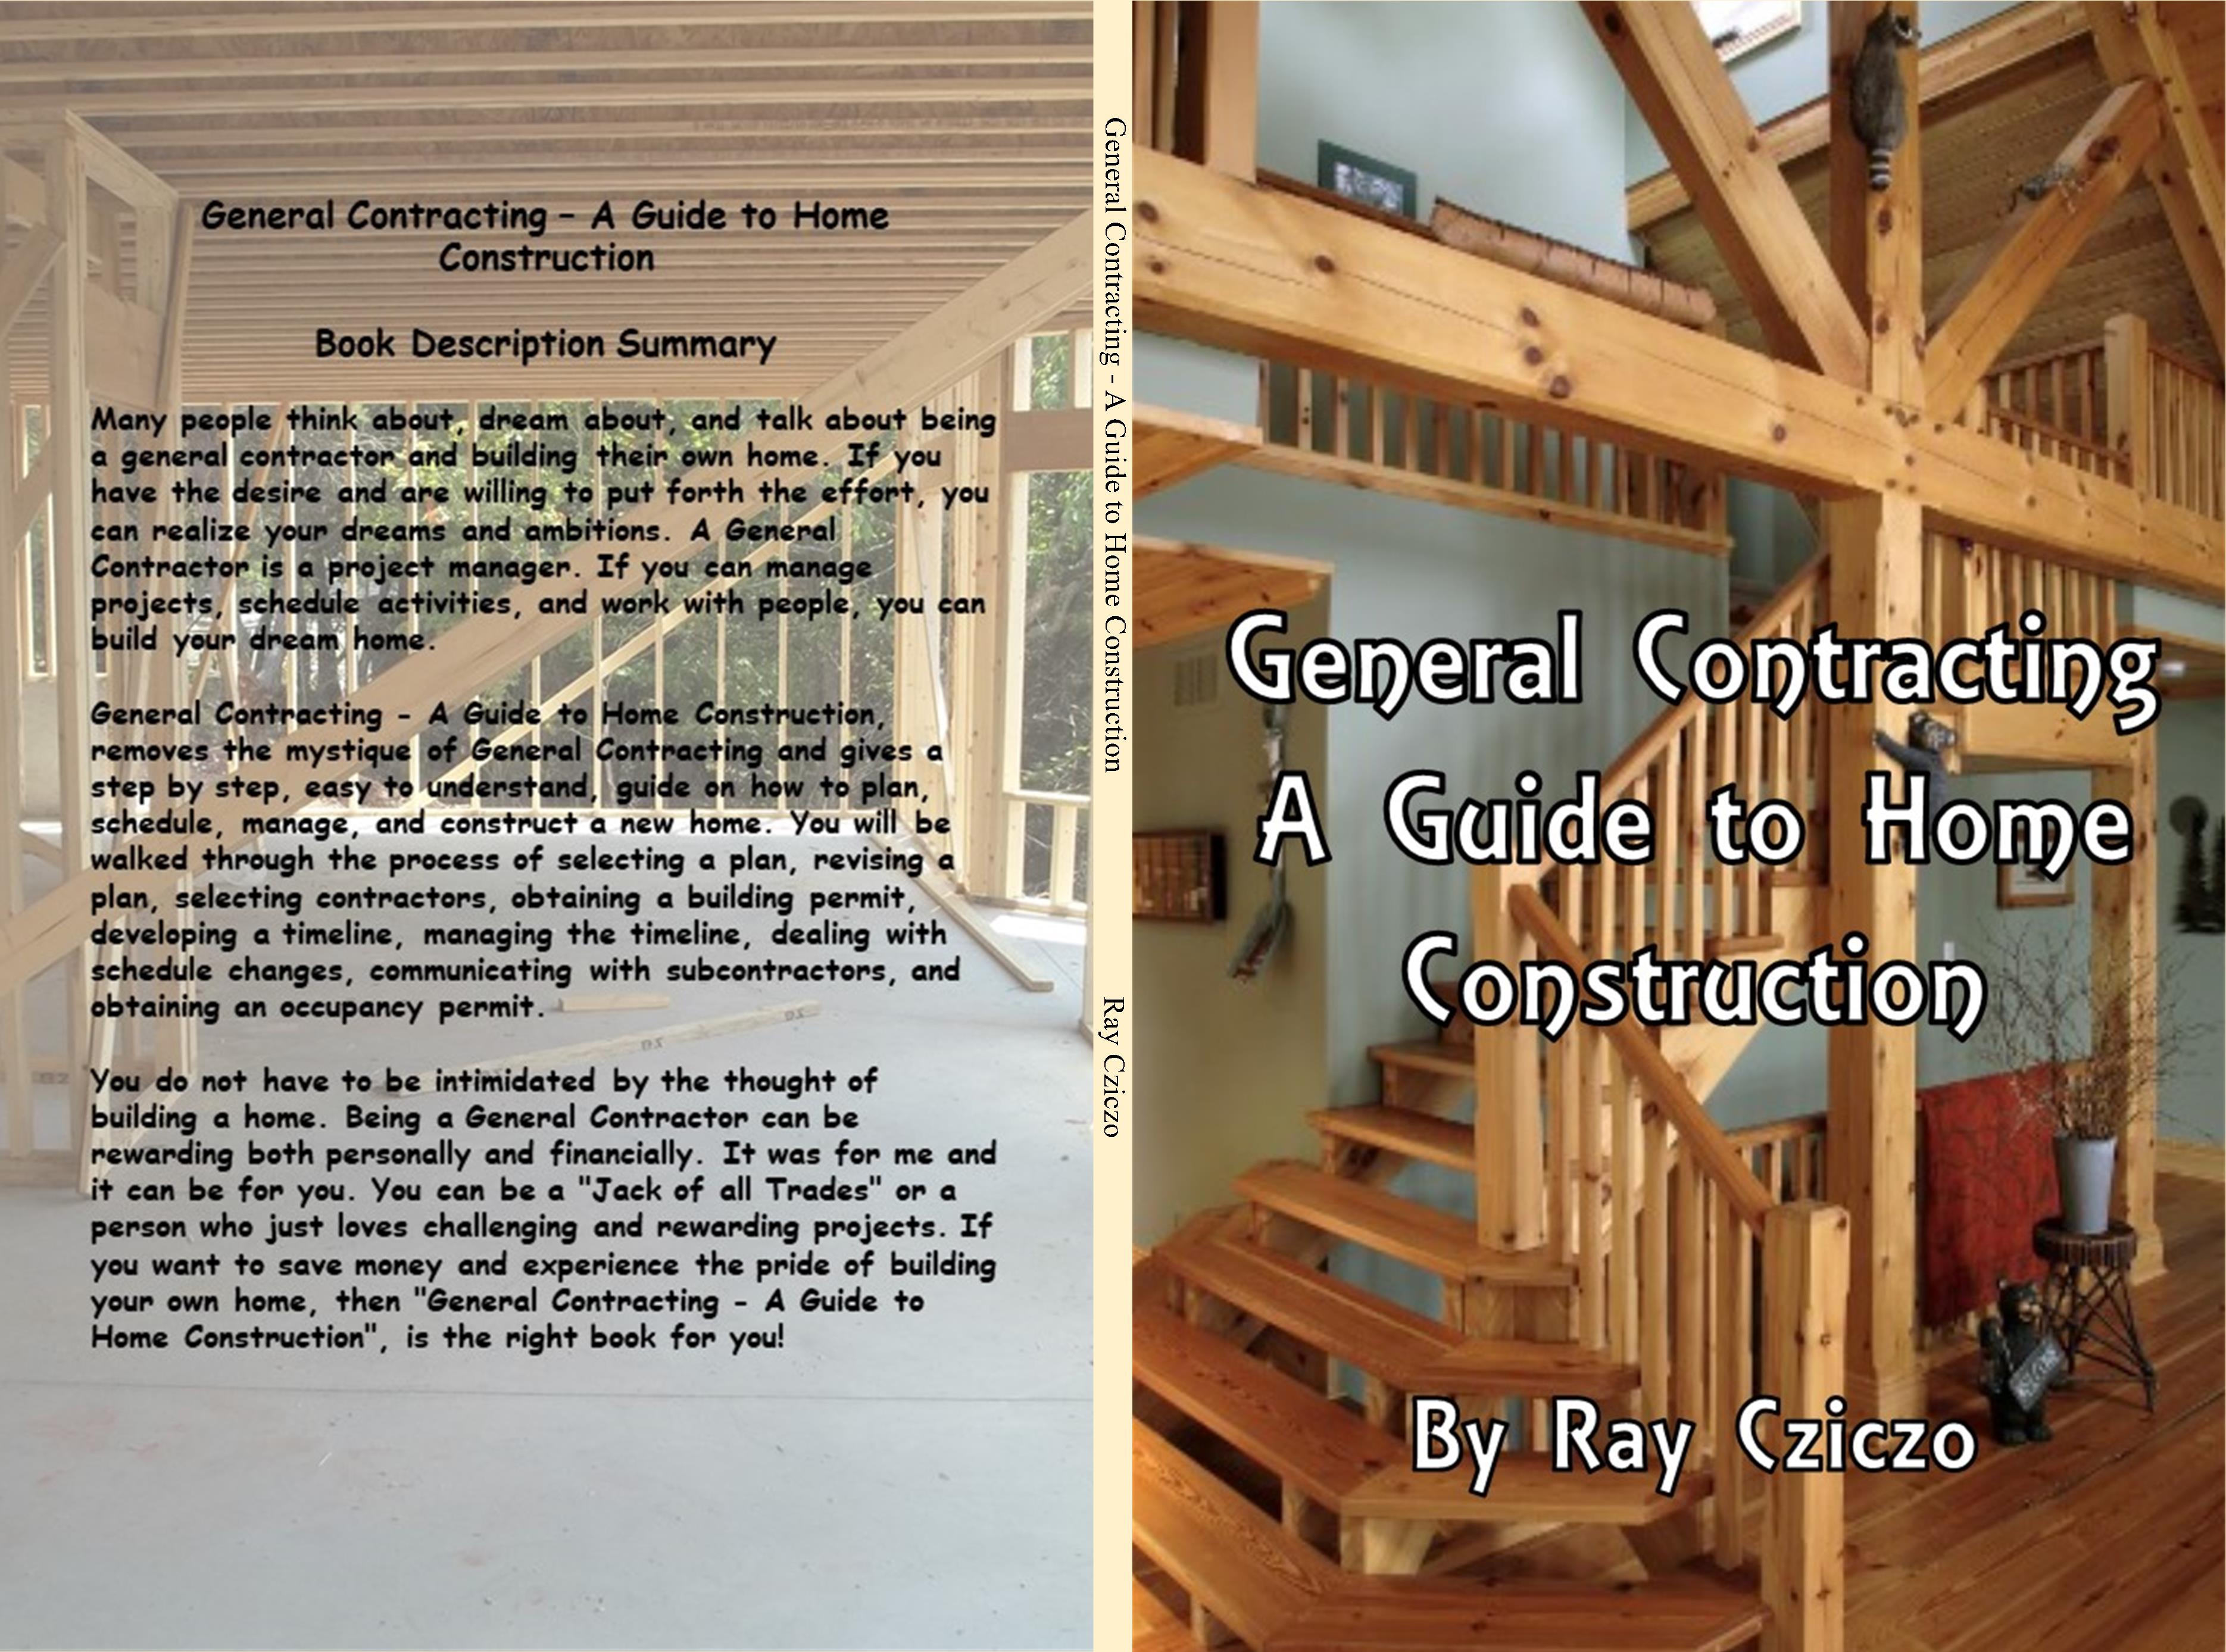 General Contracting - A Guide to Home Construction cover image